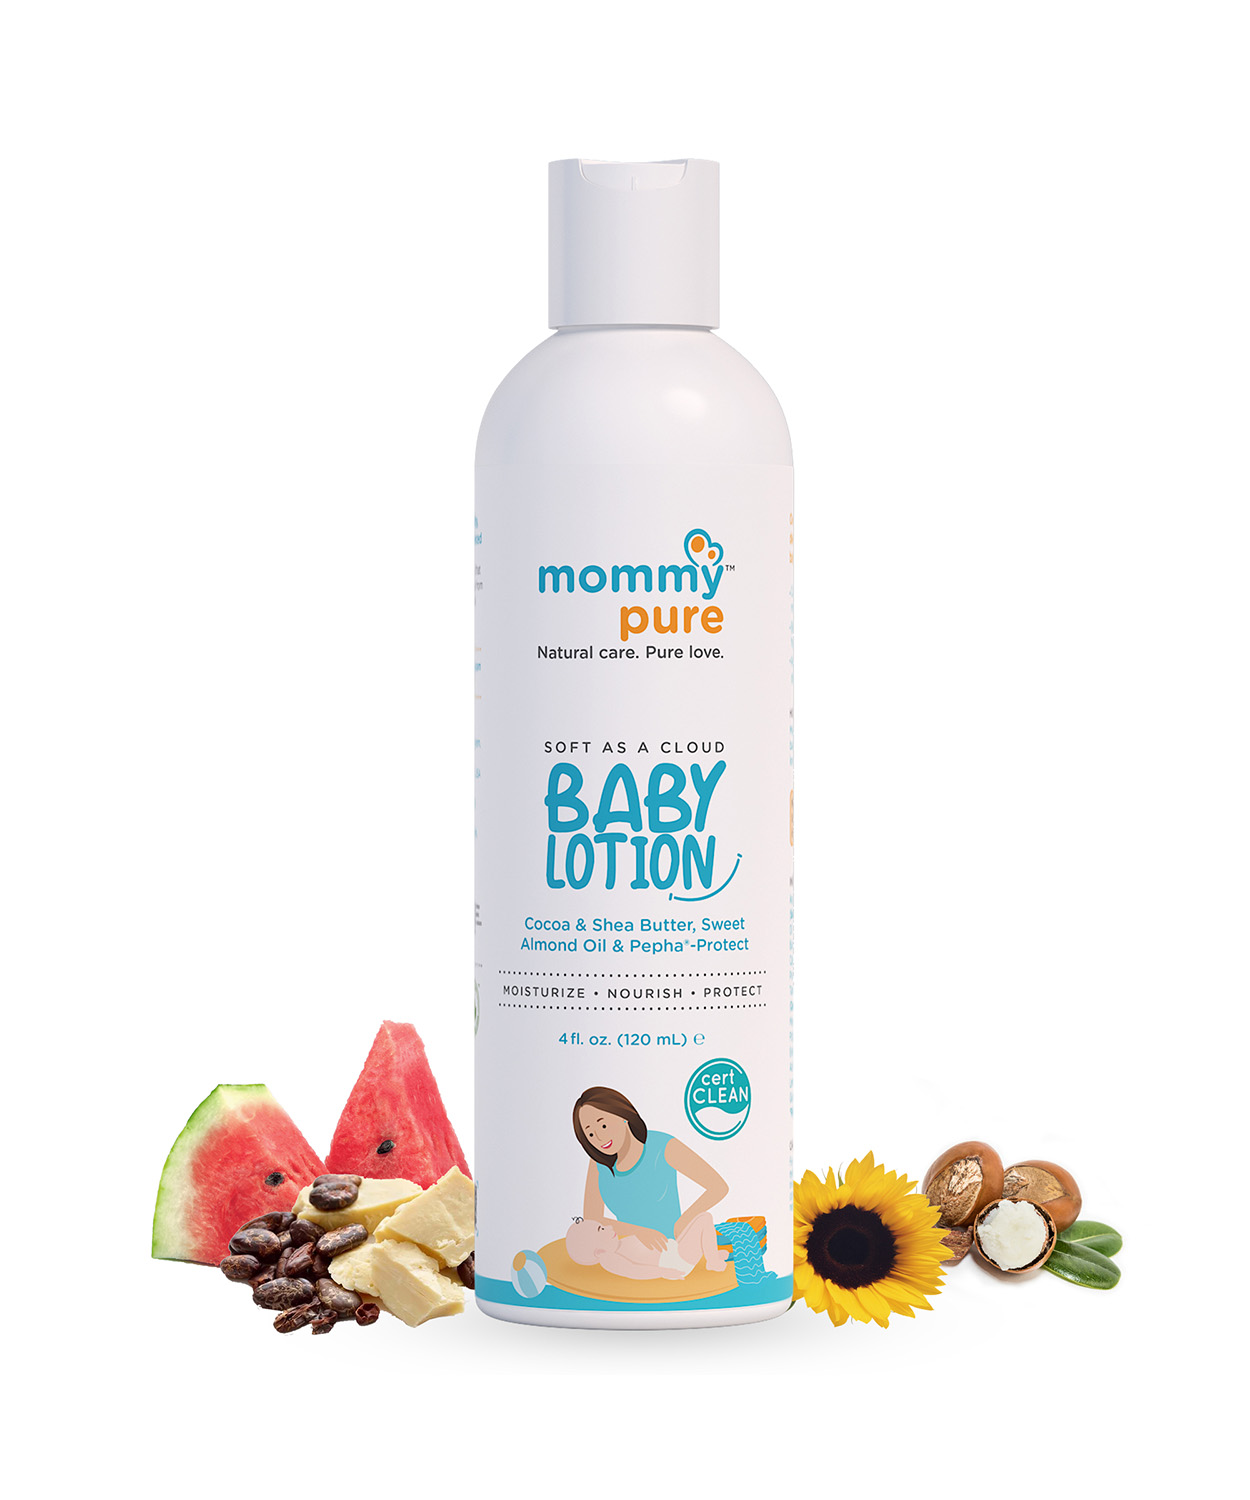 Certified Clean & Natural Baby Lotion 120ml With Cocoa & Shea Butter Toxin-Free & Dermatologically Tested Free Of Harmful Chemicals, Gently Moisturizes & Protects Baby's Delicate Skin